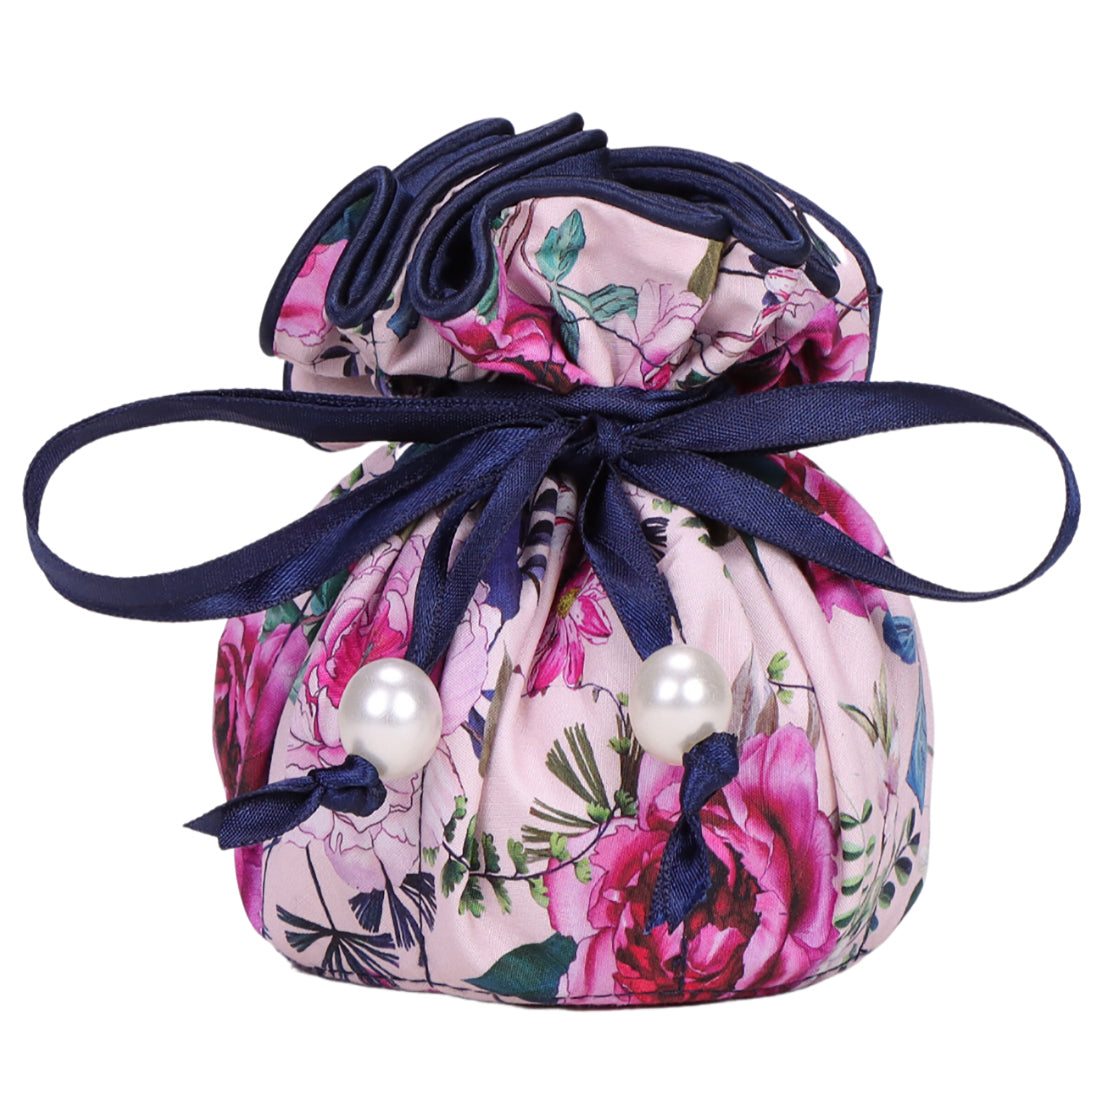 Drawstring Jewelry Pouch, Pink Floral